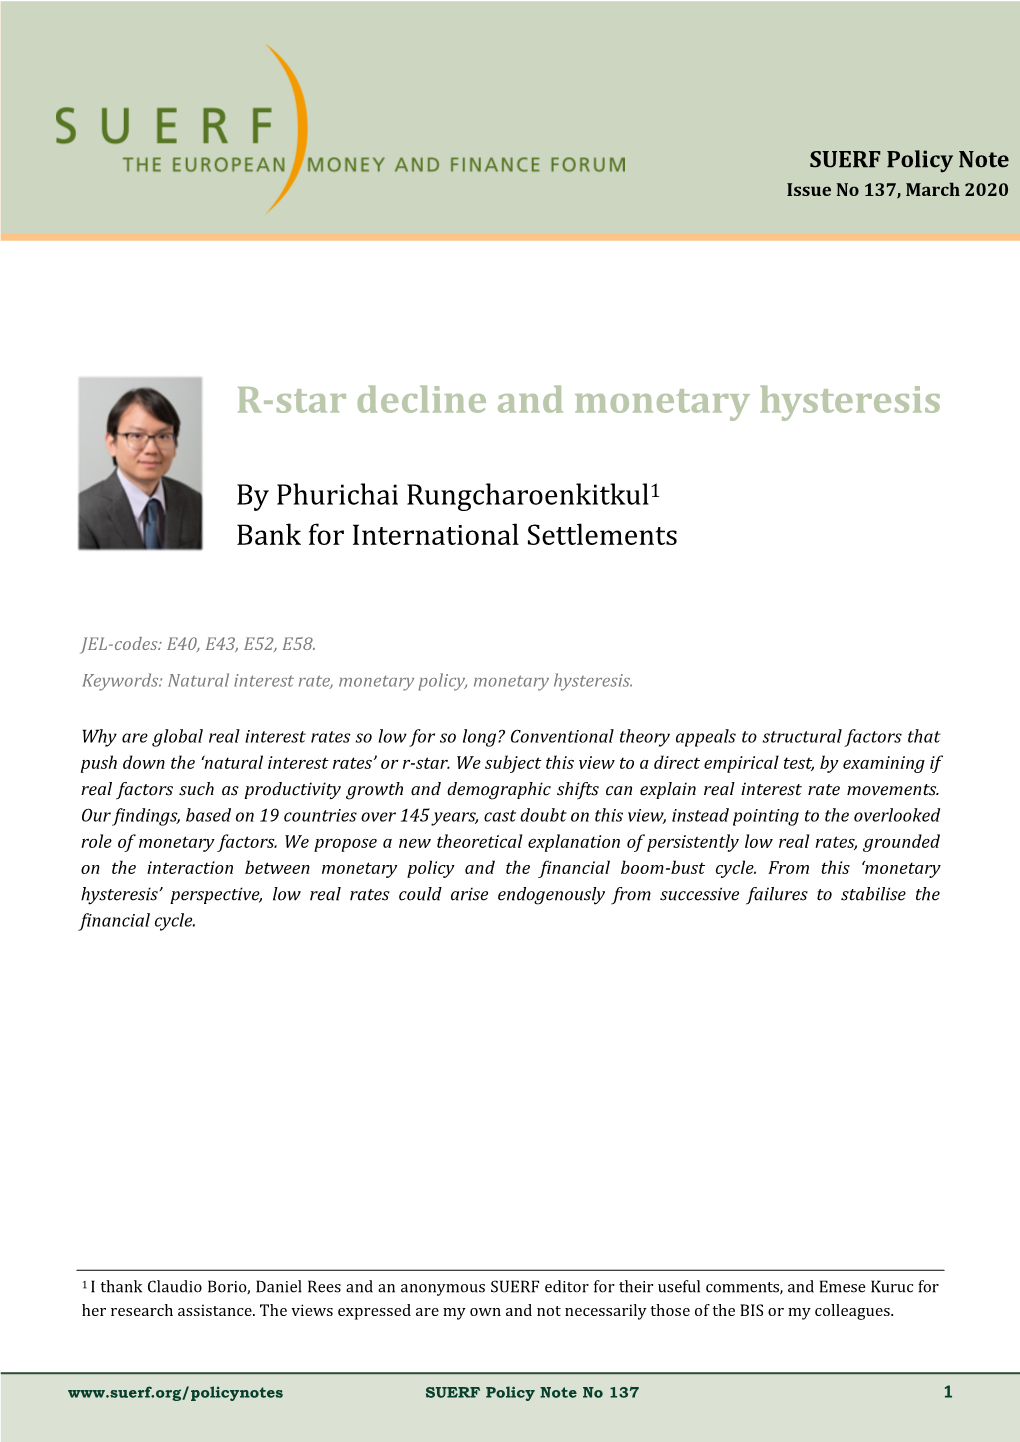 R-Star Decline and Monetary Hysteresis